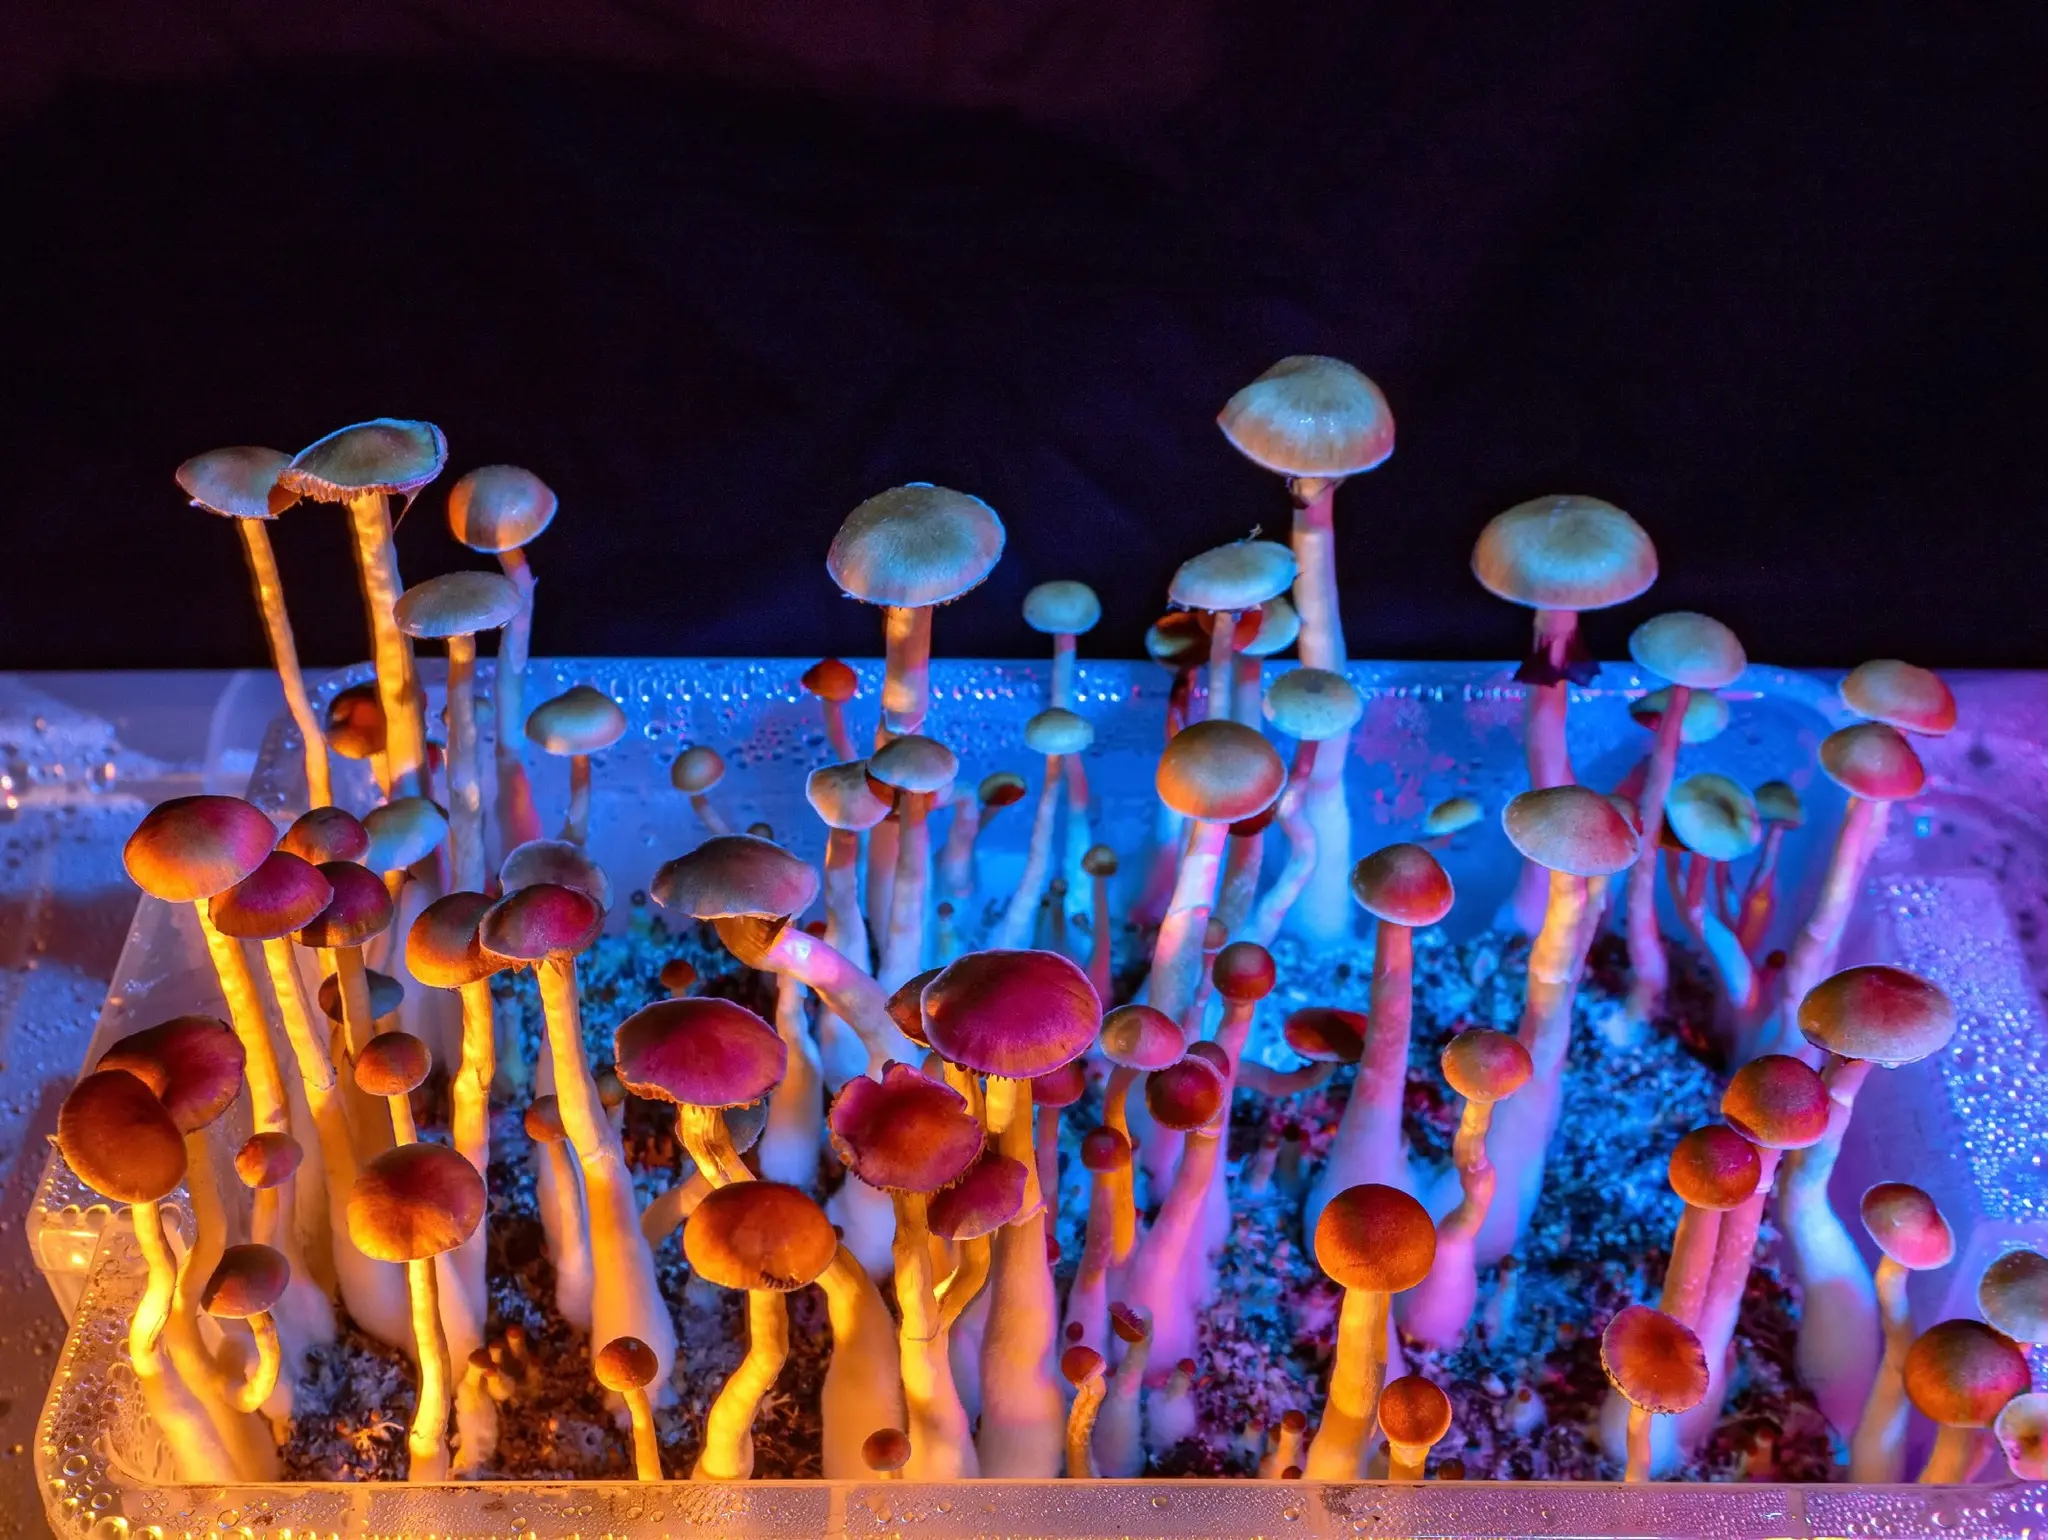 Psychedelic medicines and the treatment of neurological conditions